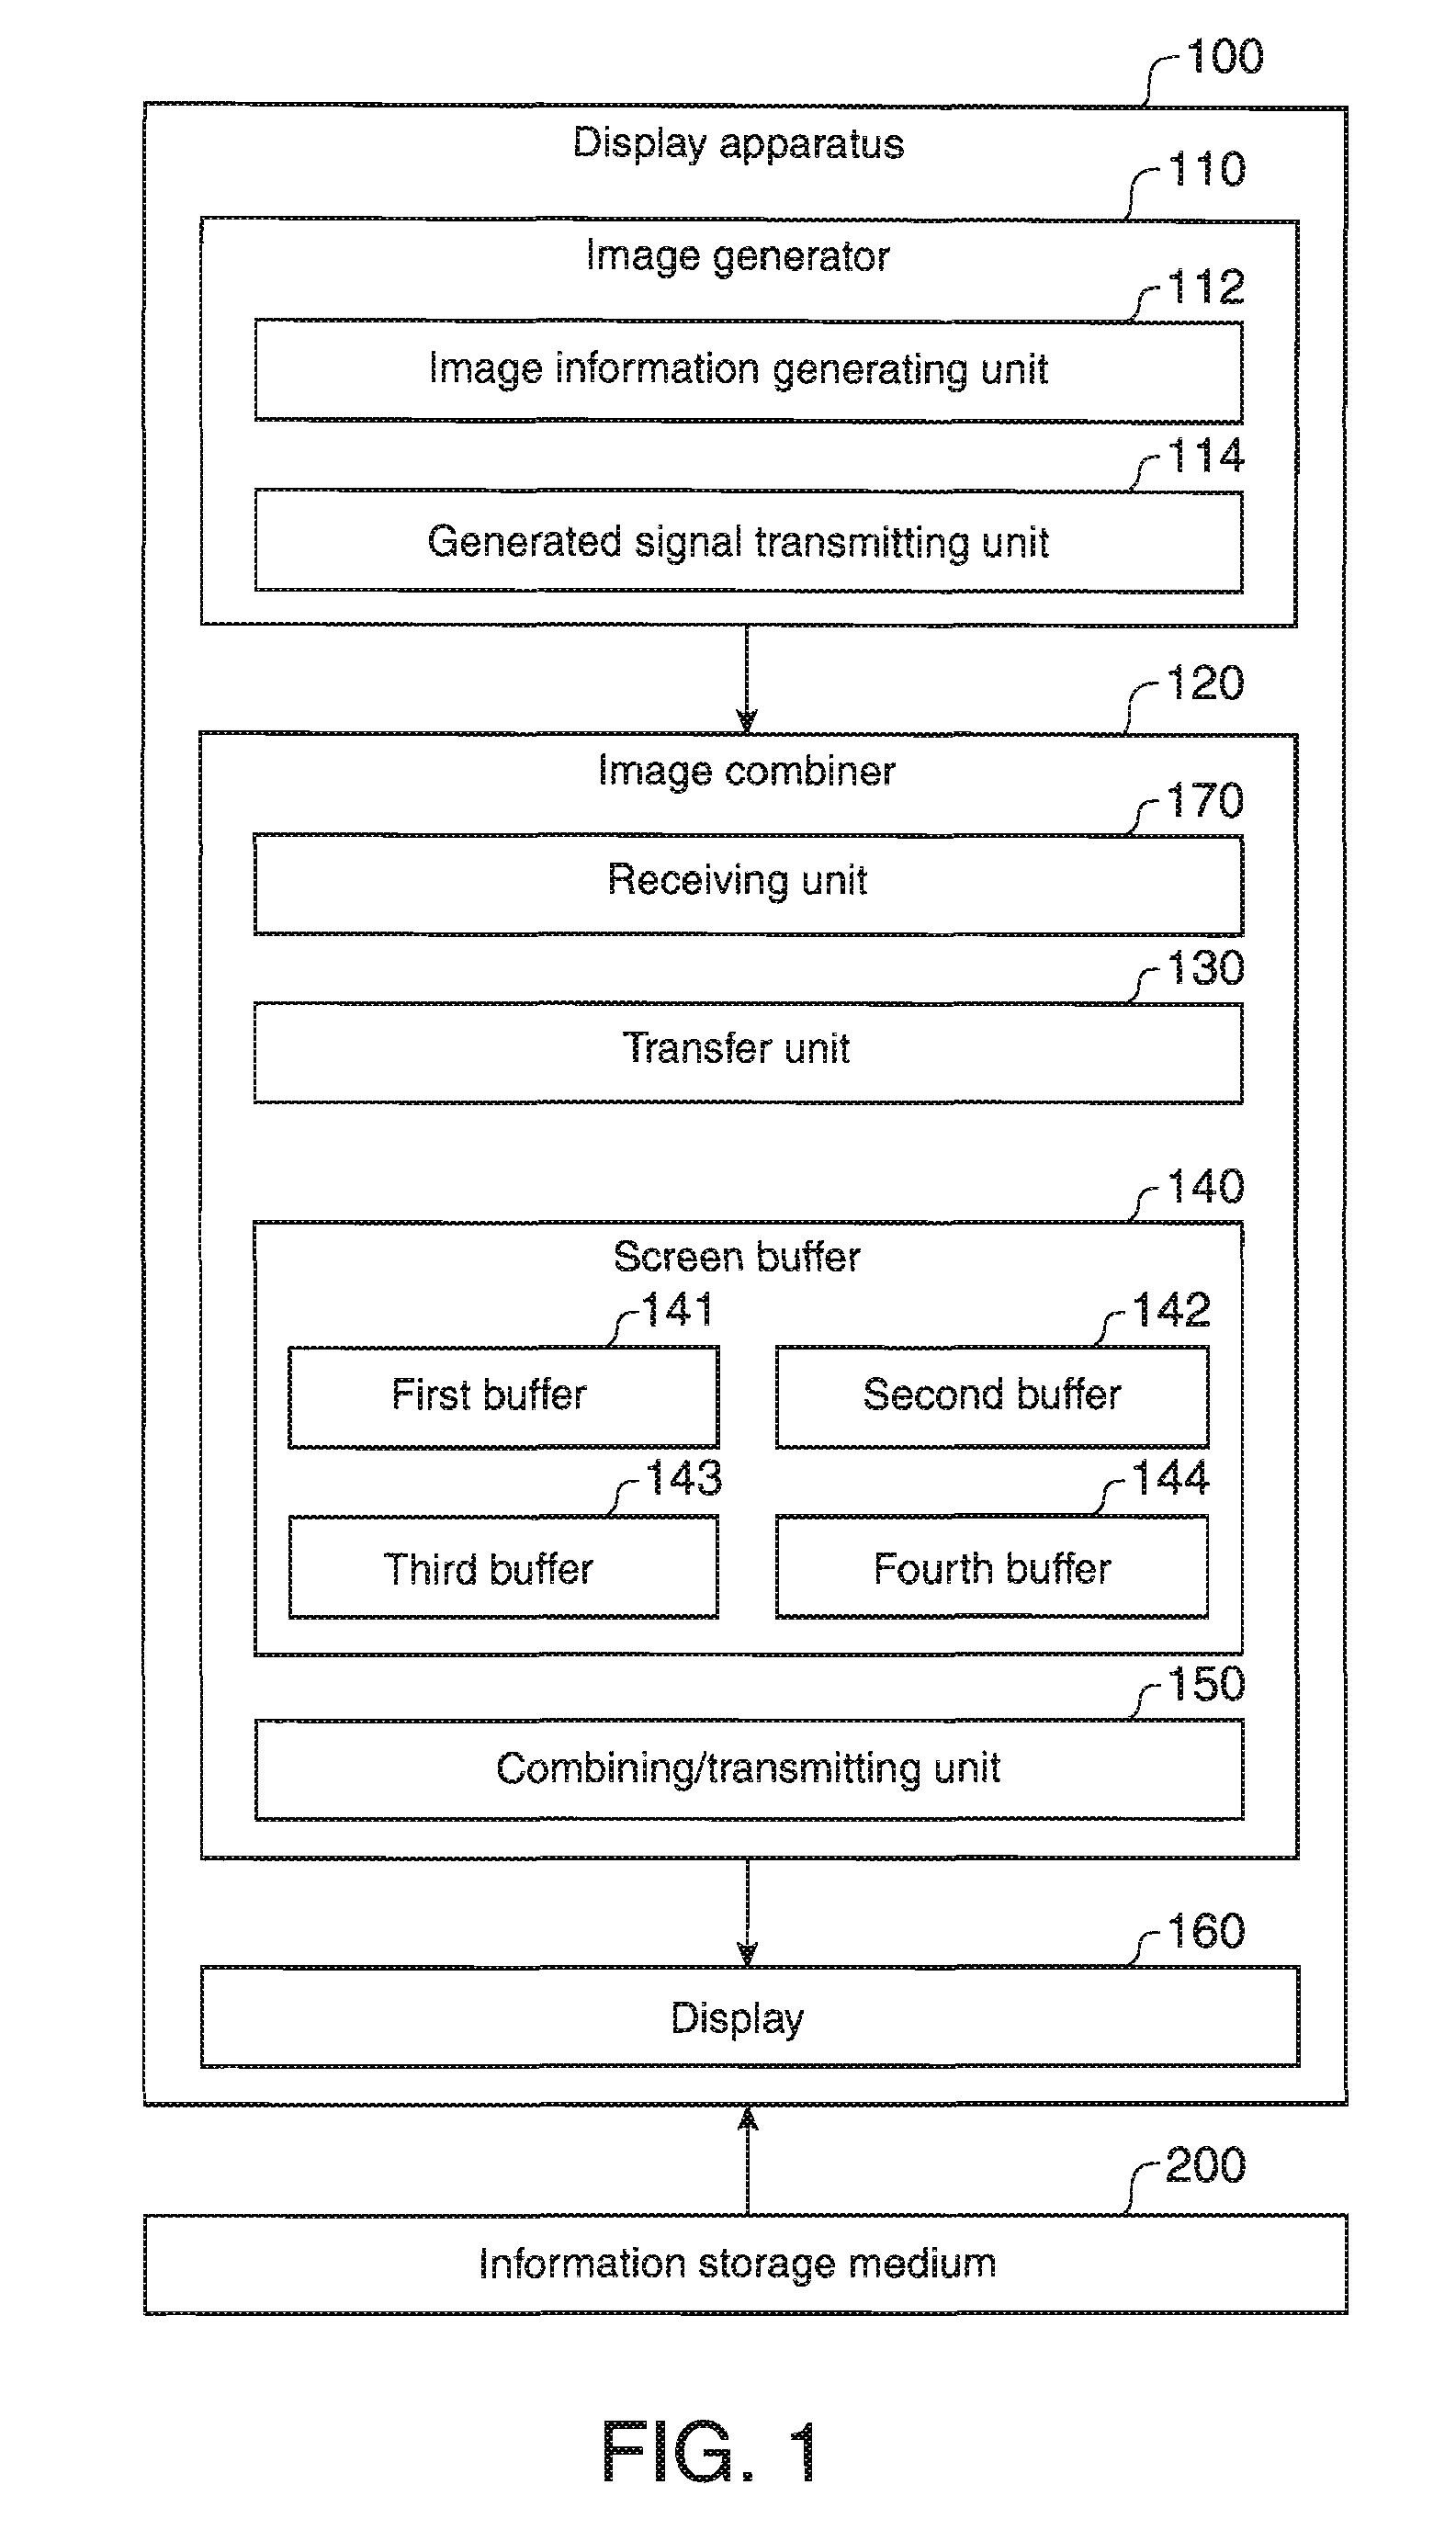 Image processing system, display apparatus and image processing method